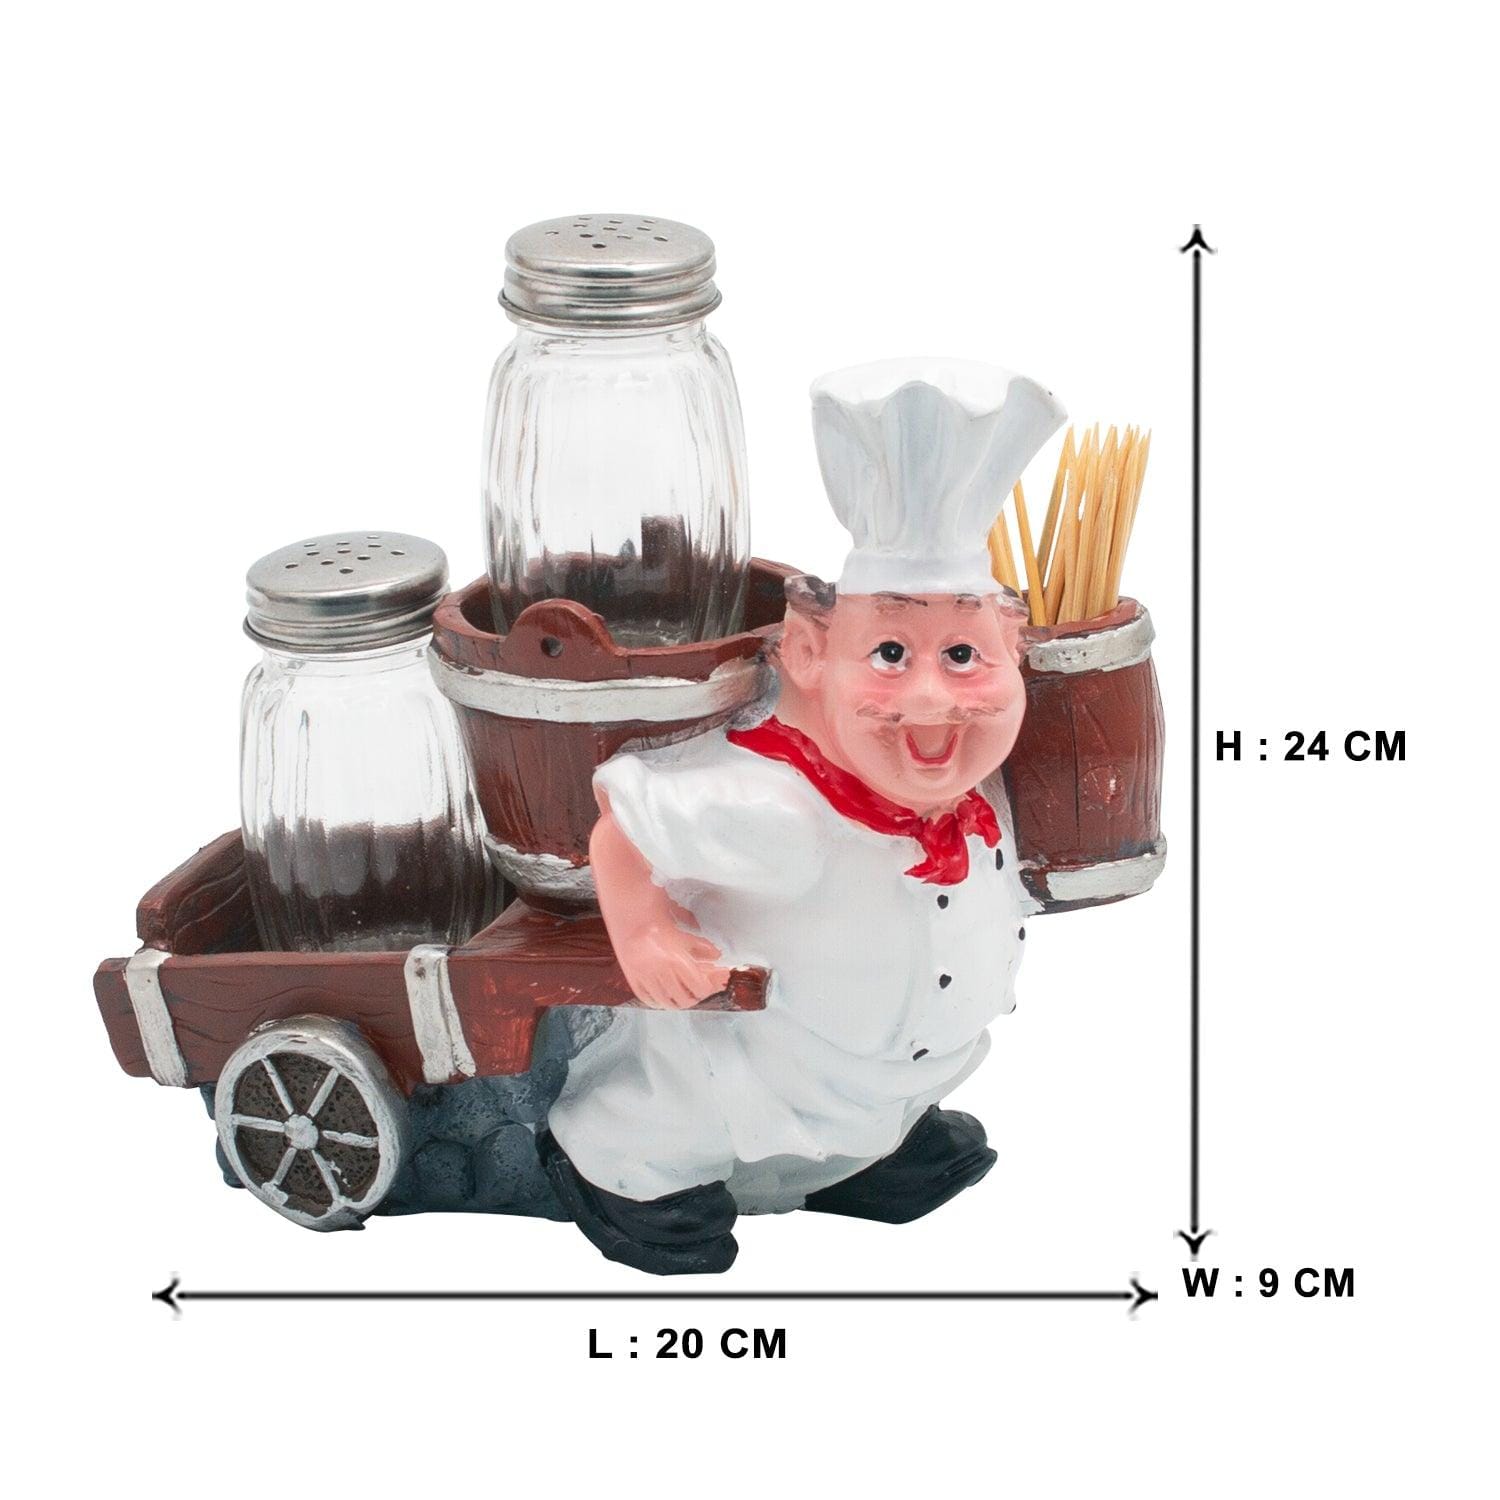 Foodie Chef Figurine Resin Salt & Pepper Shakers with Toothpick Holder Set (Cart on Back)